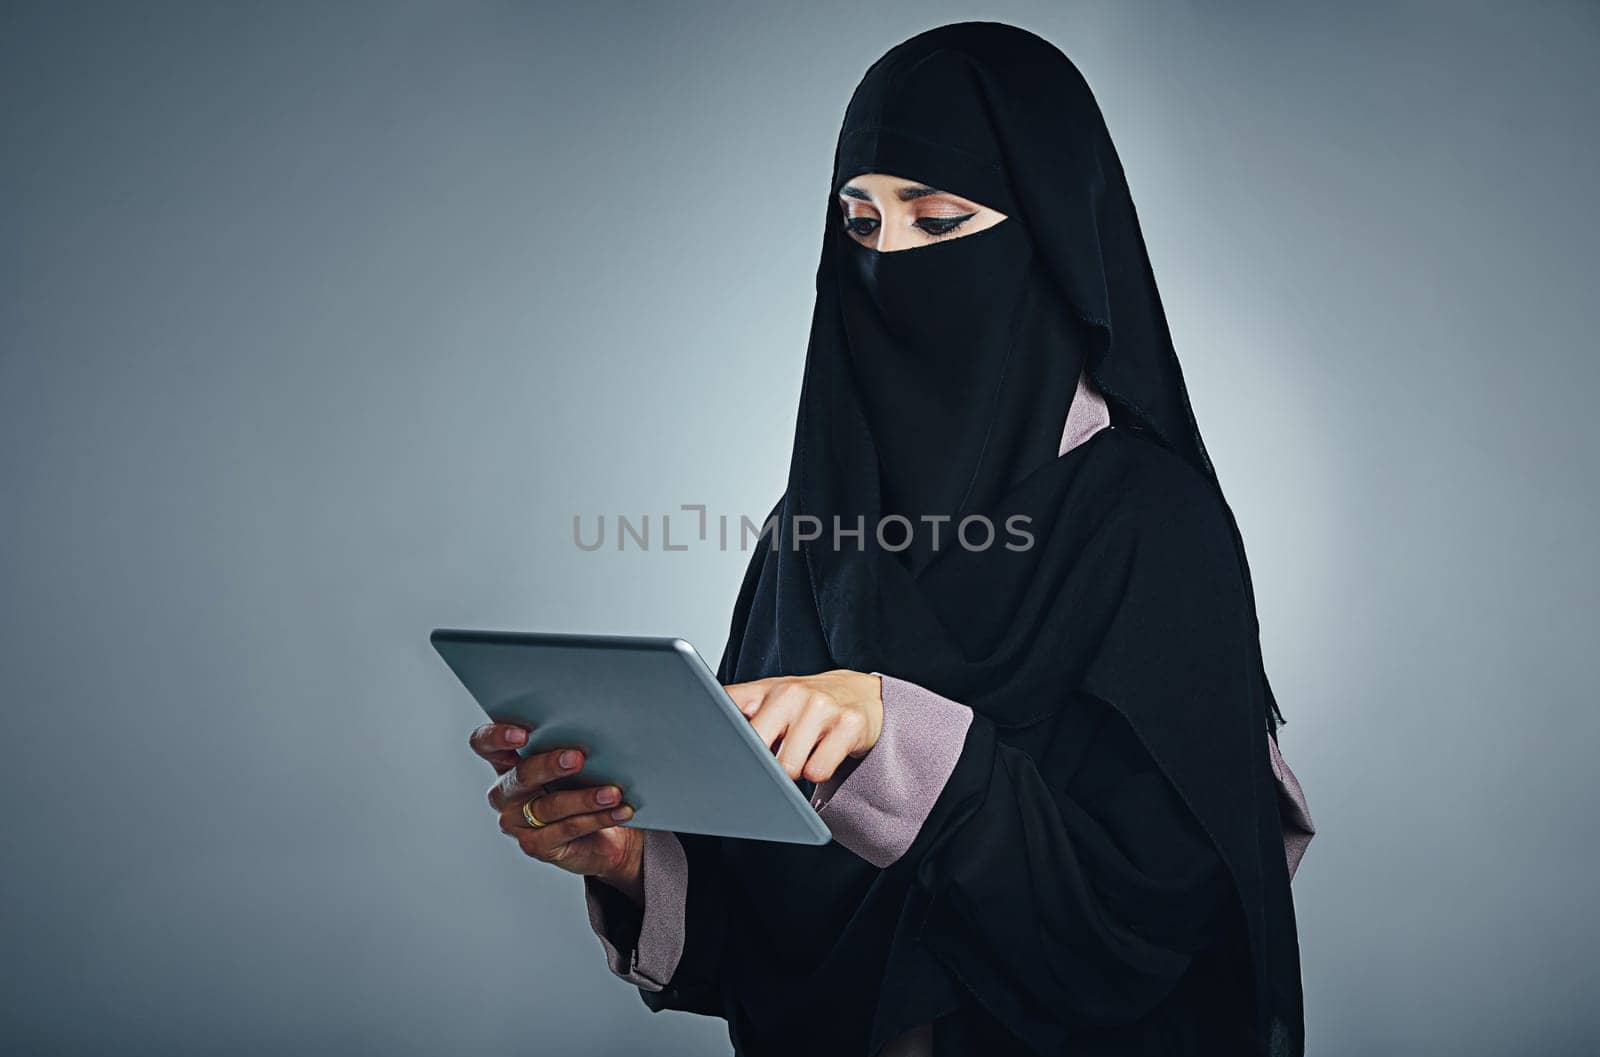 Doing so much with just one touch. Studio shot of a young woman wearing a burqa and using a digital tablet against a gray background